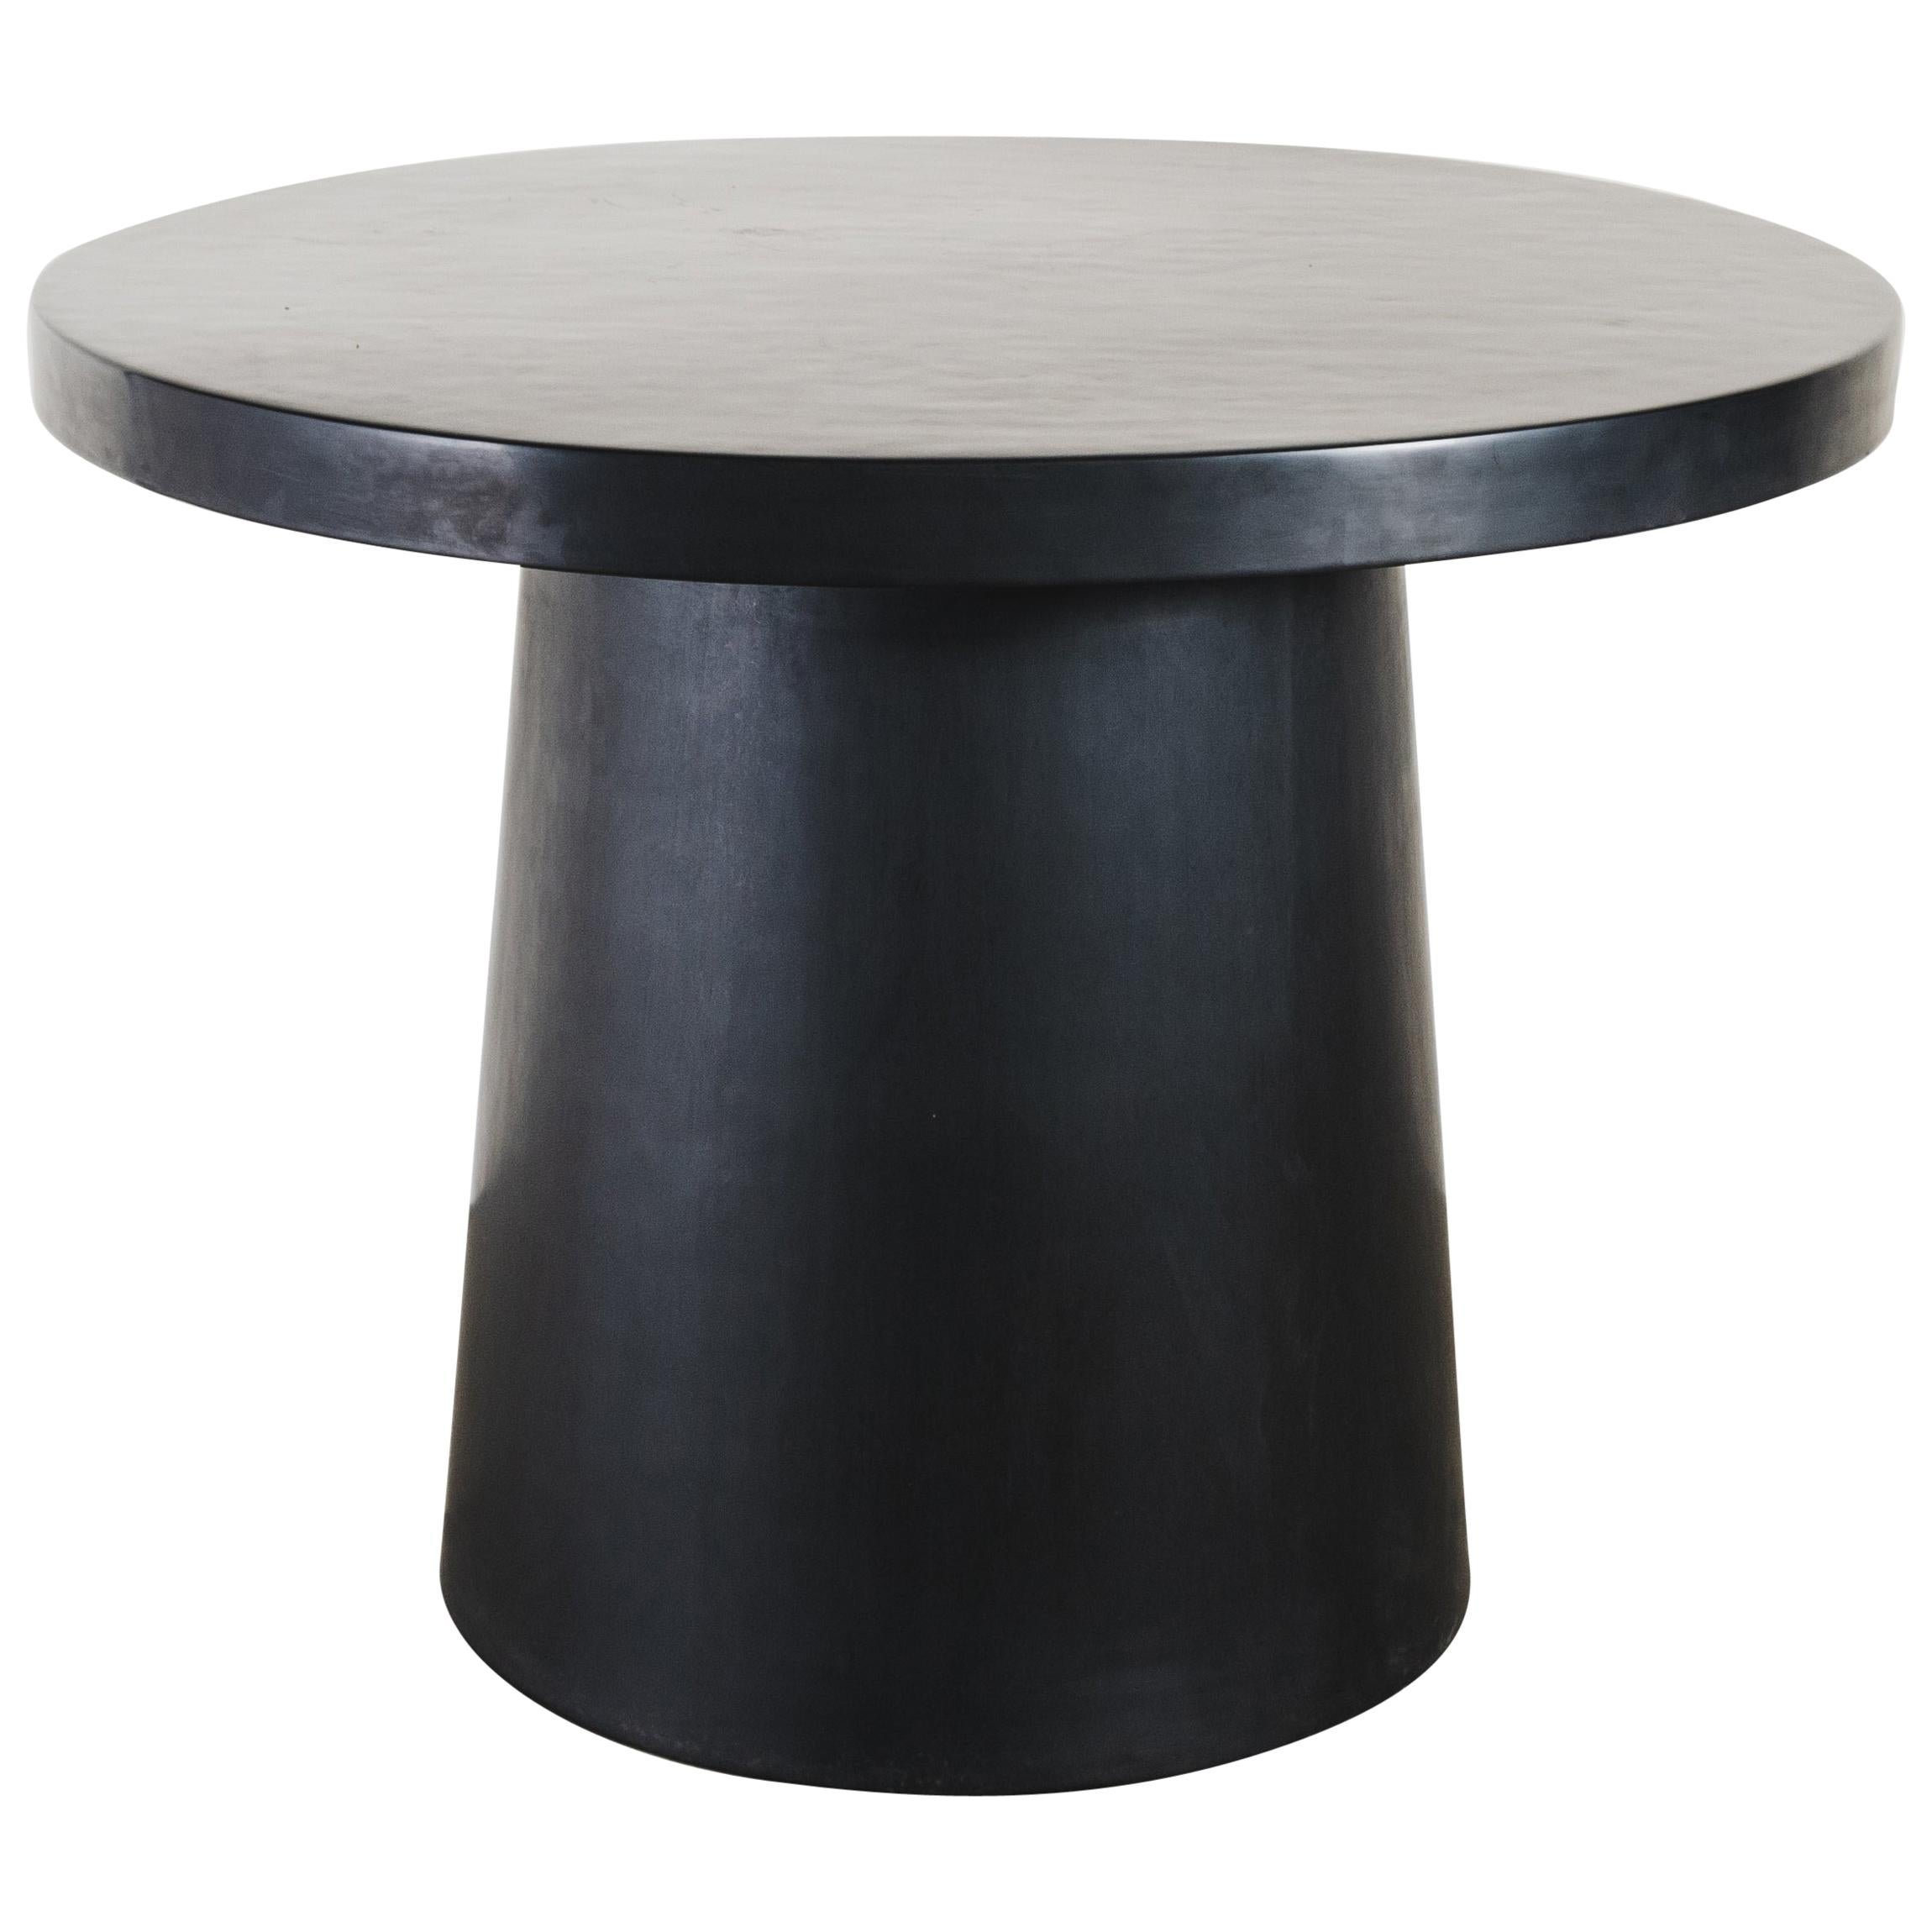 Full Moon Table, Black Lacquer by Robert Kuo, Handmade, Limited Edition